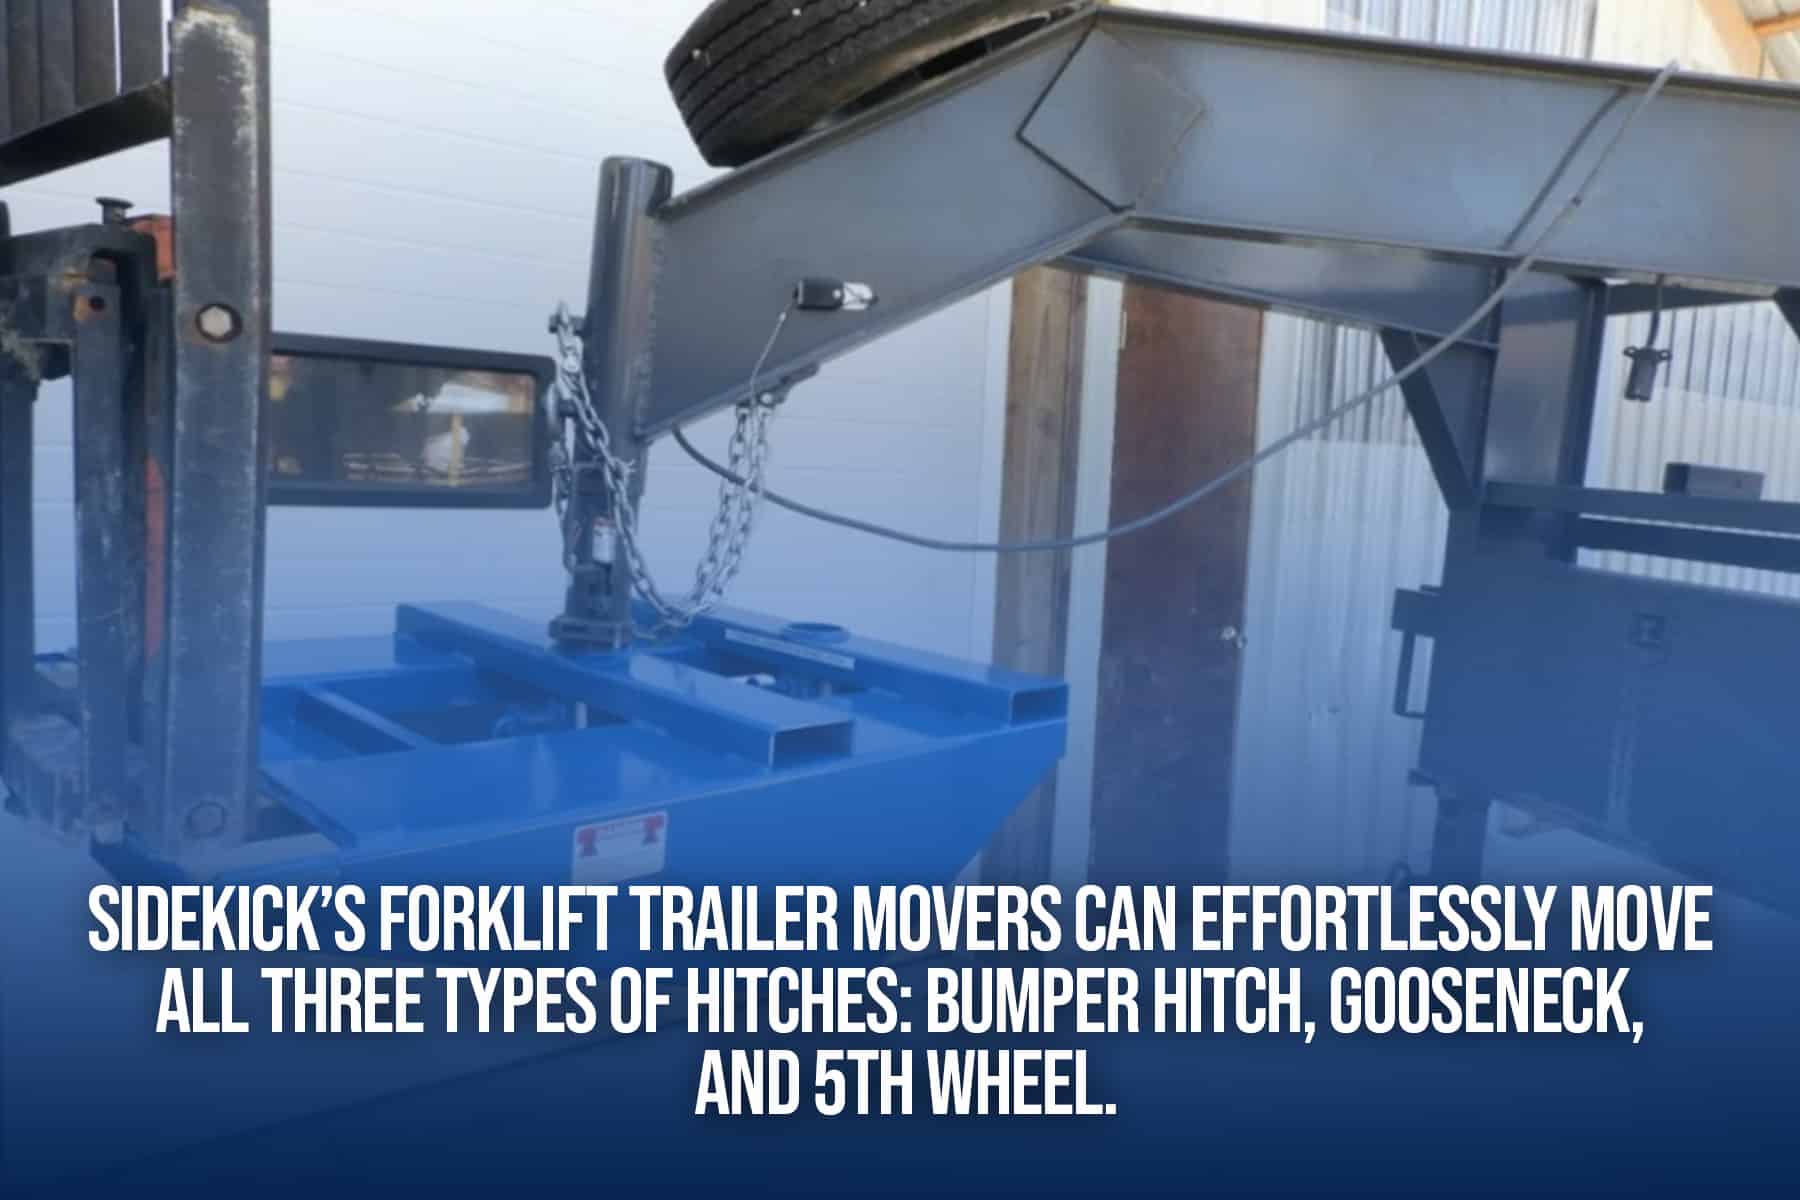 sidekick attachments trailer movers can move multiple types of trailers